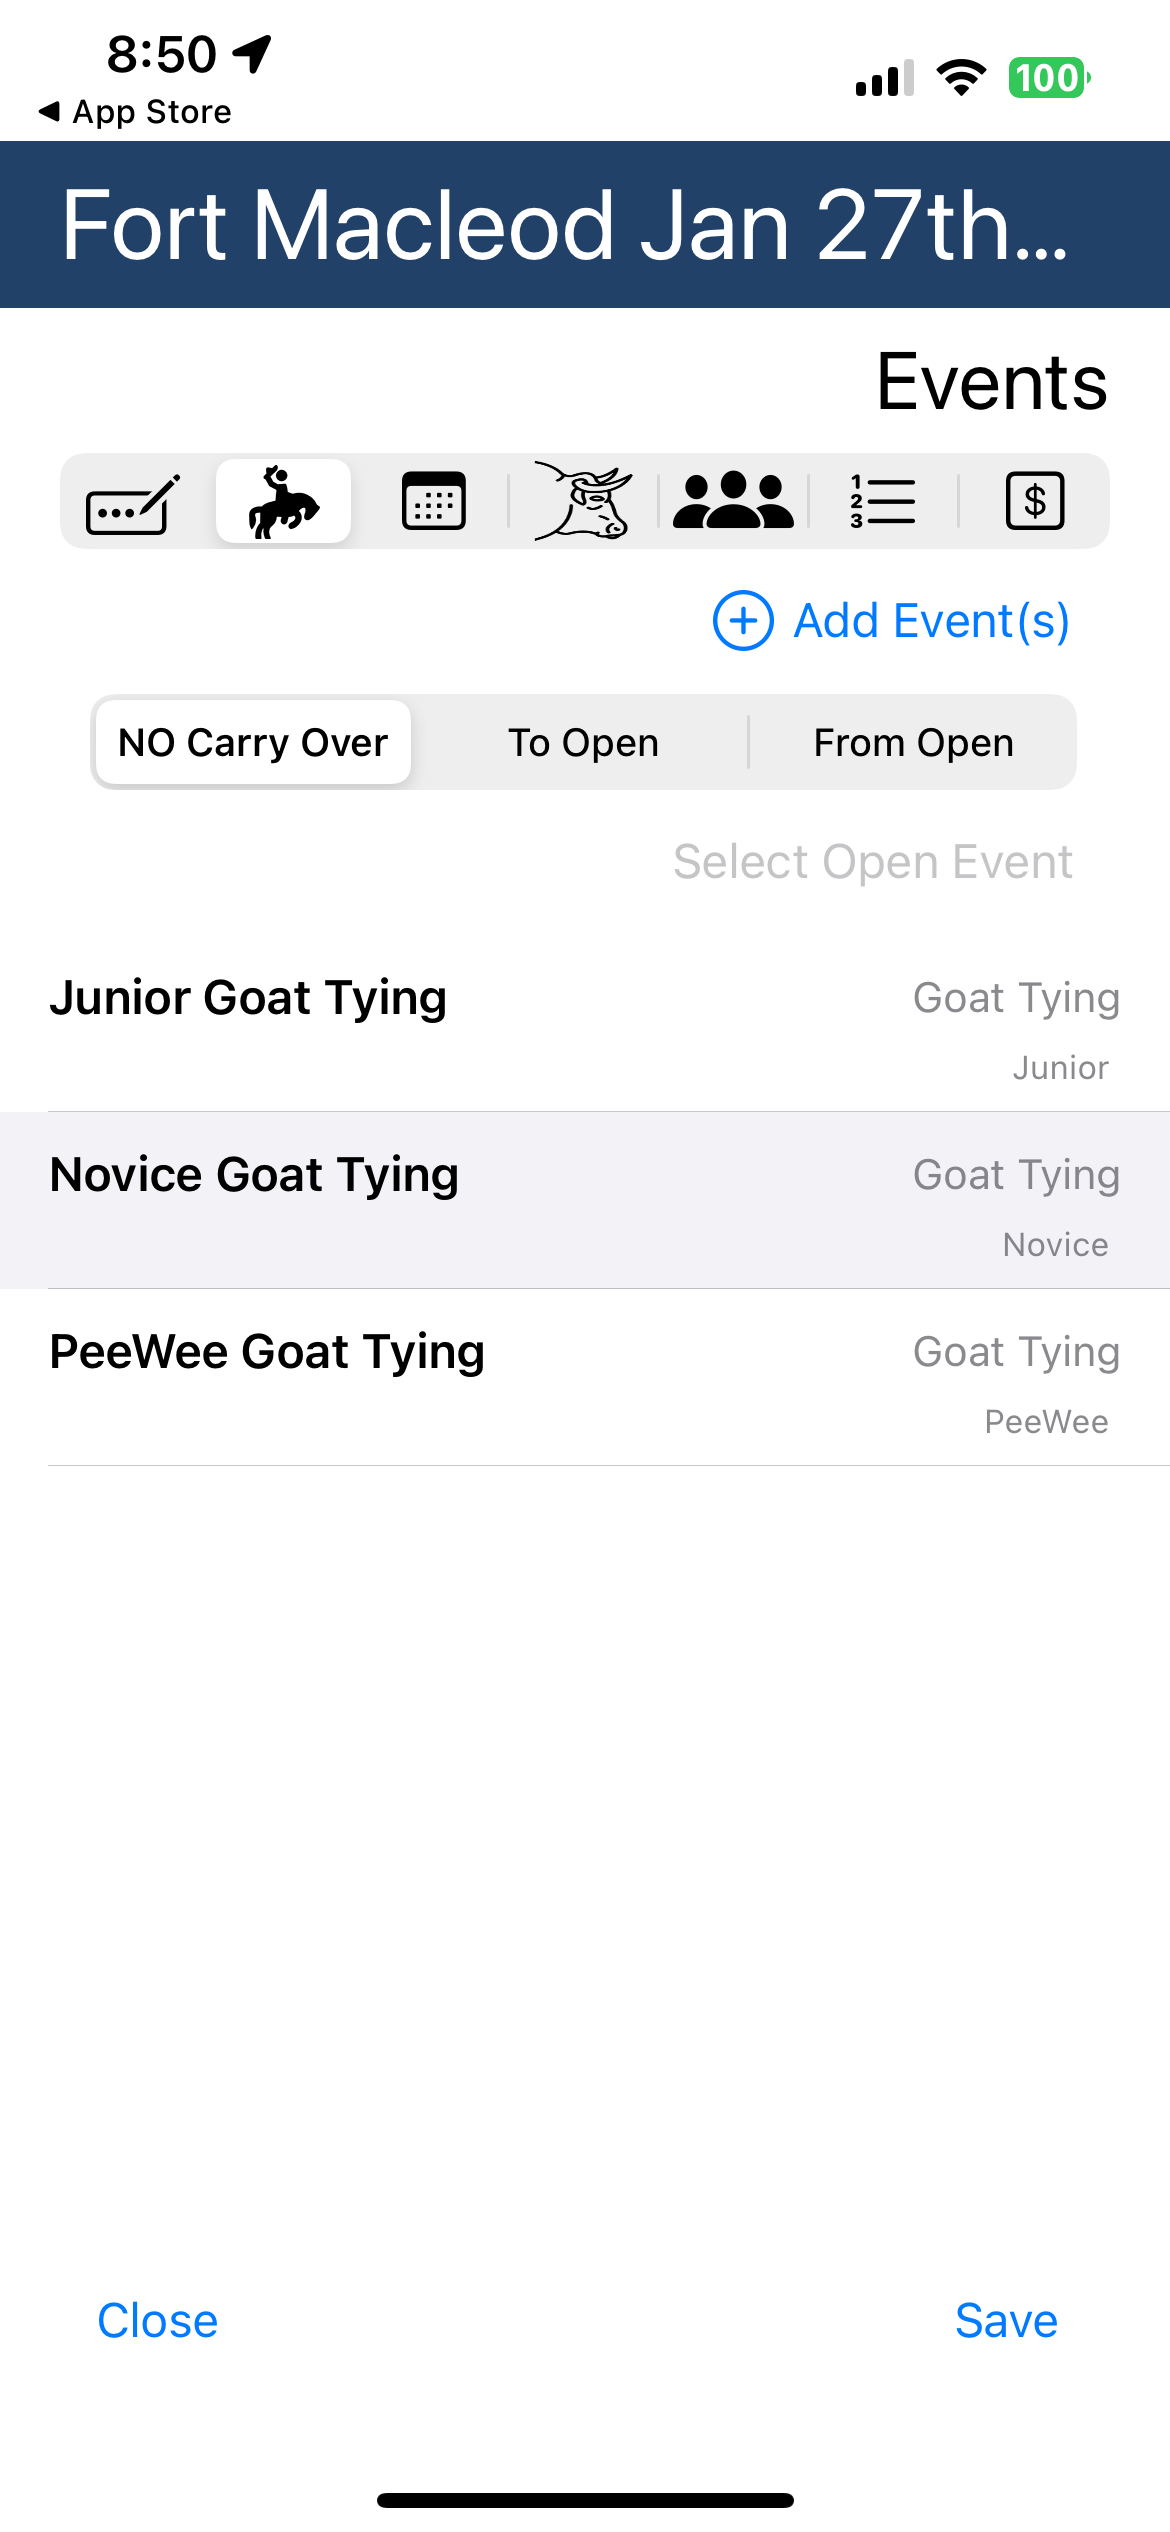 goat-tying-competition-events